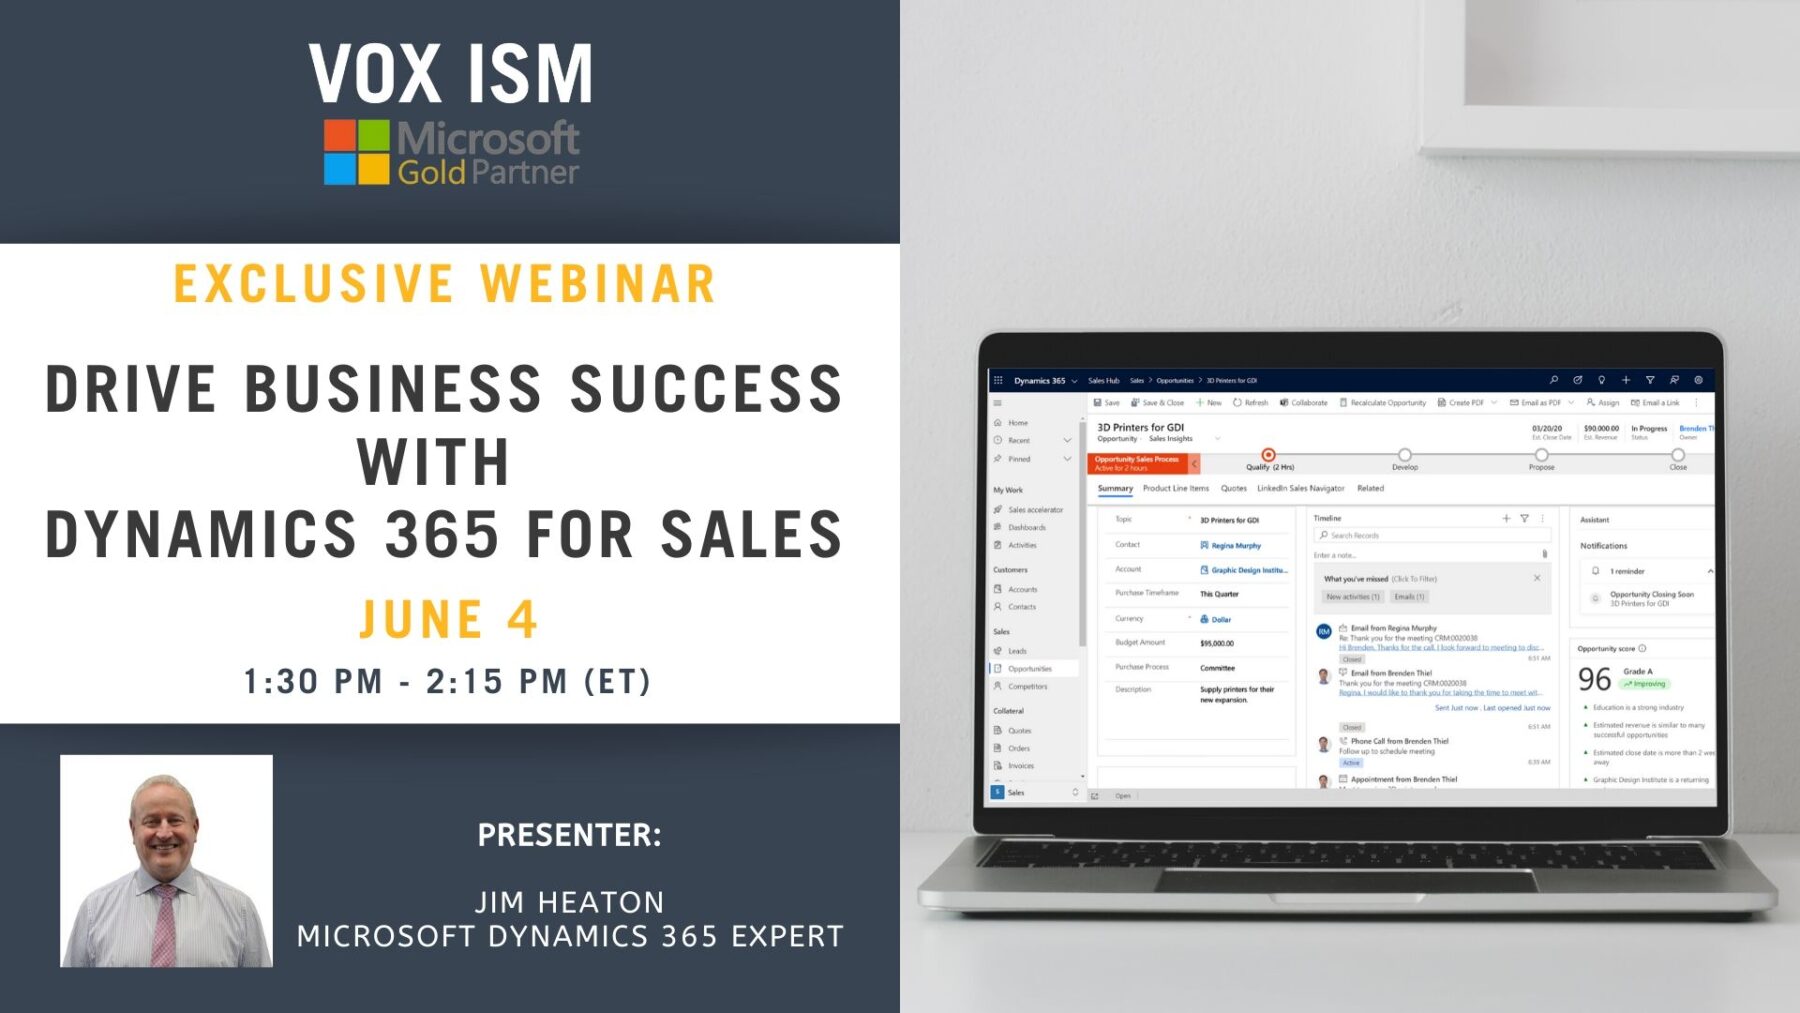 Drive Business Success with Dynamics 365 for Sales - June 4 - Webinar VOX ISM